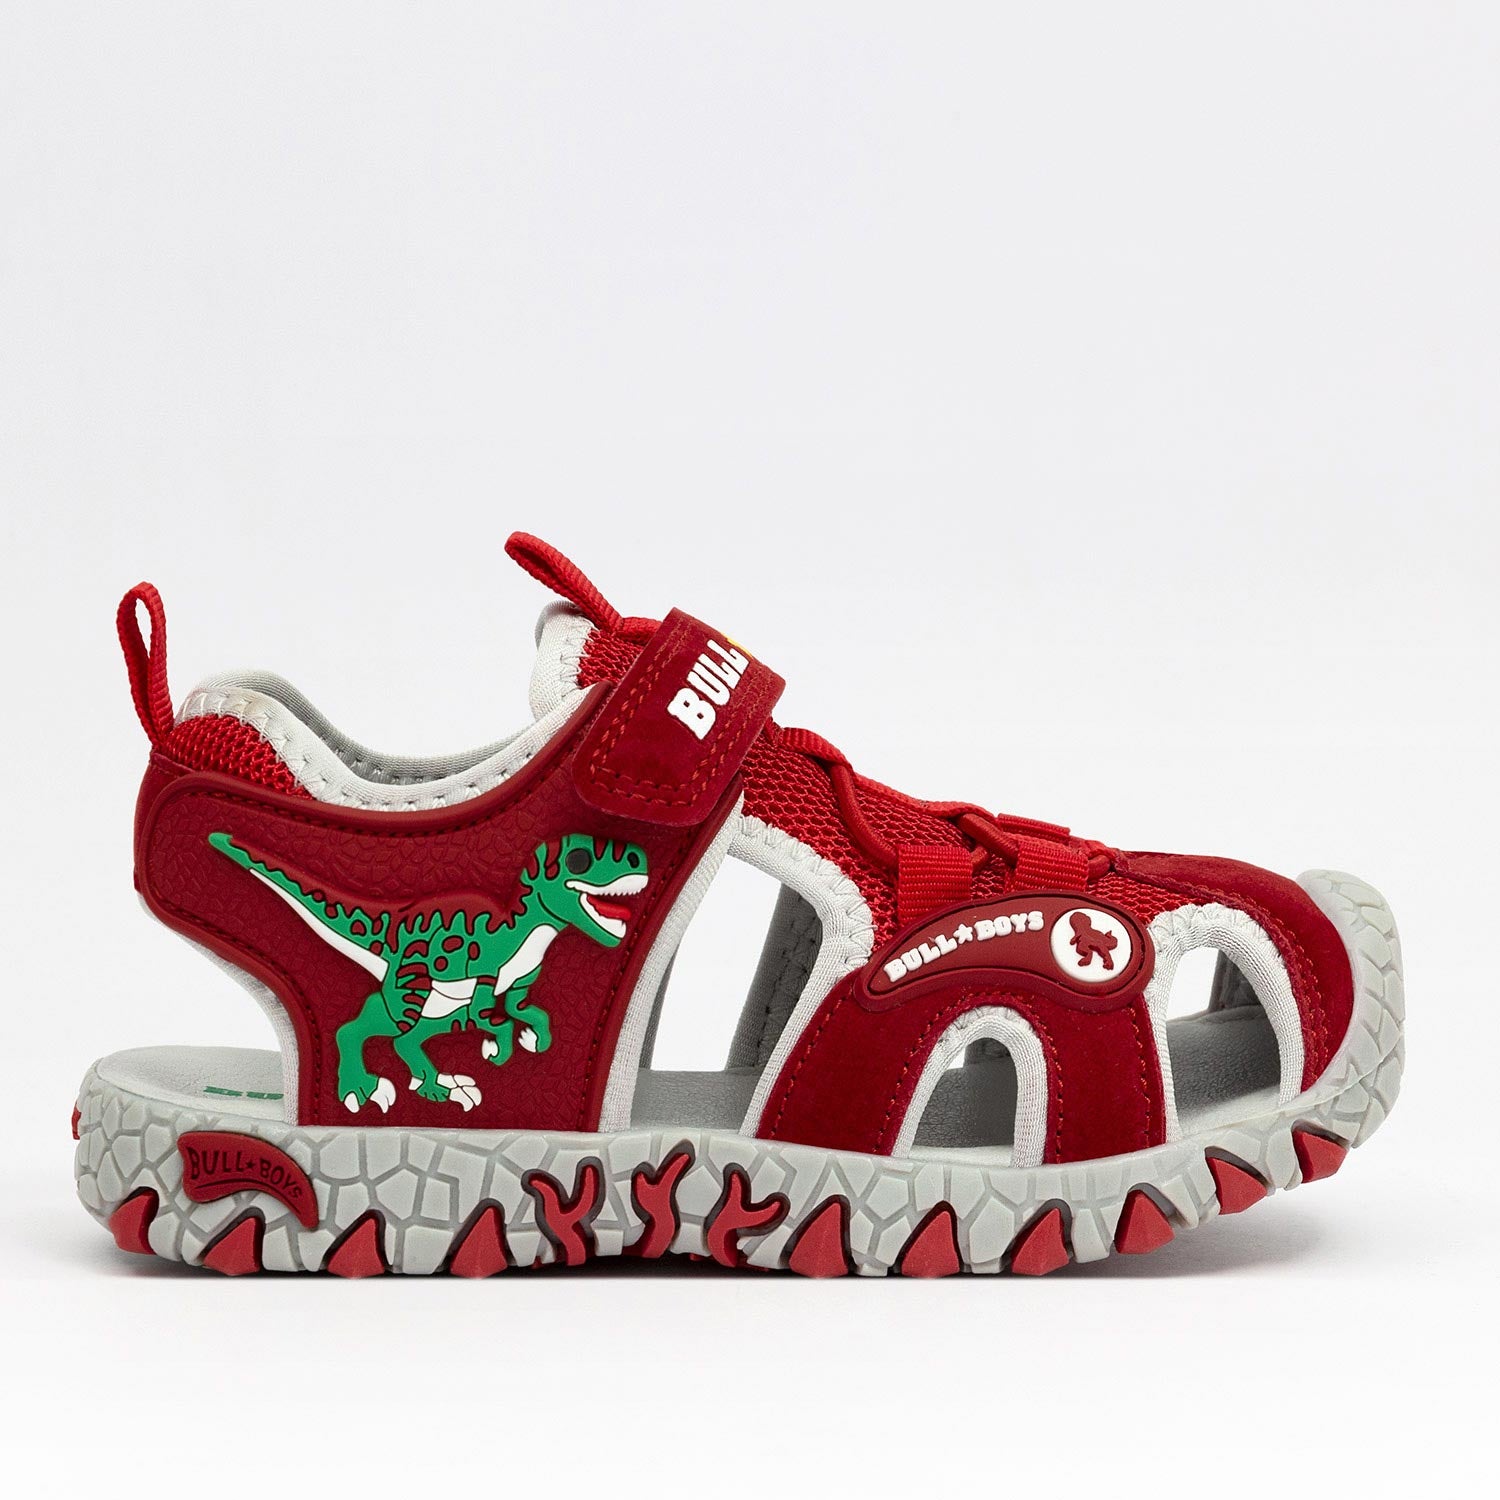 Lelli Kelly Bull Boys Dino Sandals Dncl3144 Red Footwear EU 26 / Red,EU 27 / Red,EU 28 / Red,EU 29 / Red,EU 30 / Red,EU 31 / Red,EU 32 / Red,EU 33 / Red